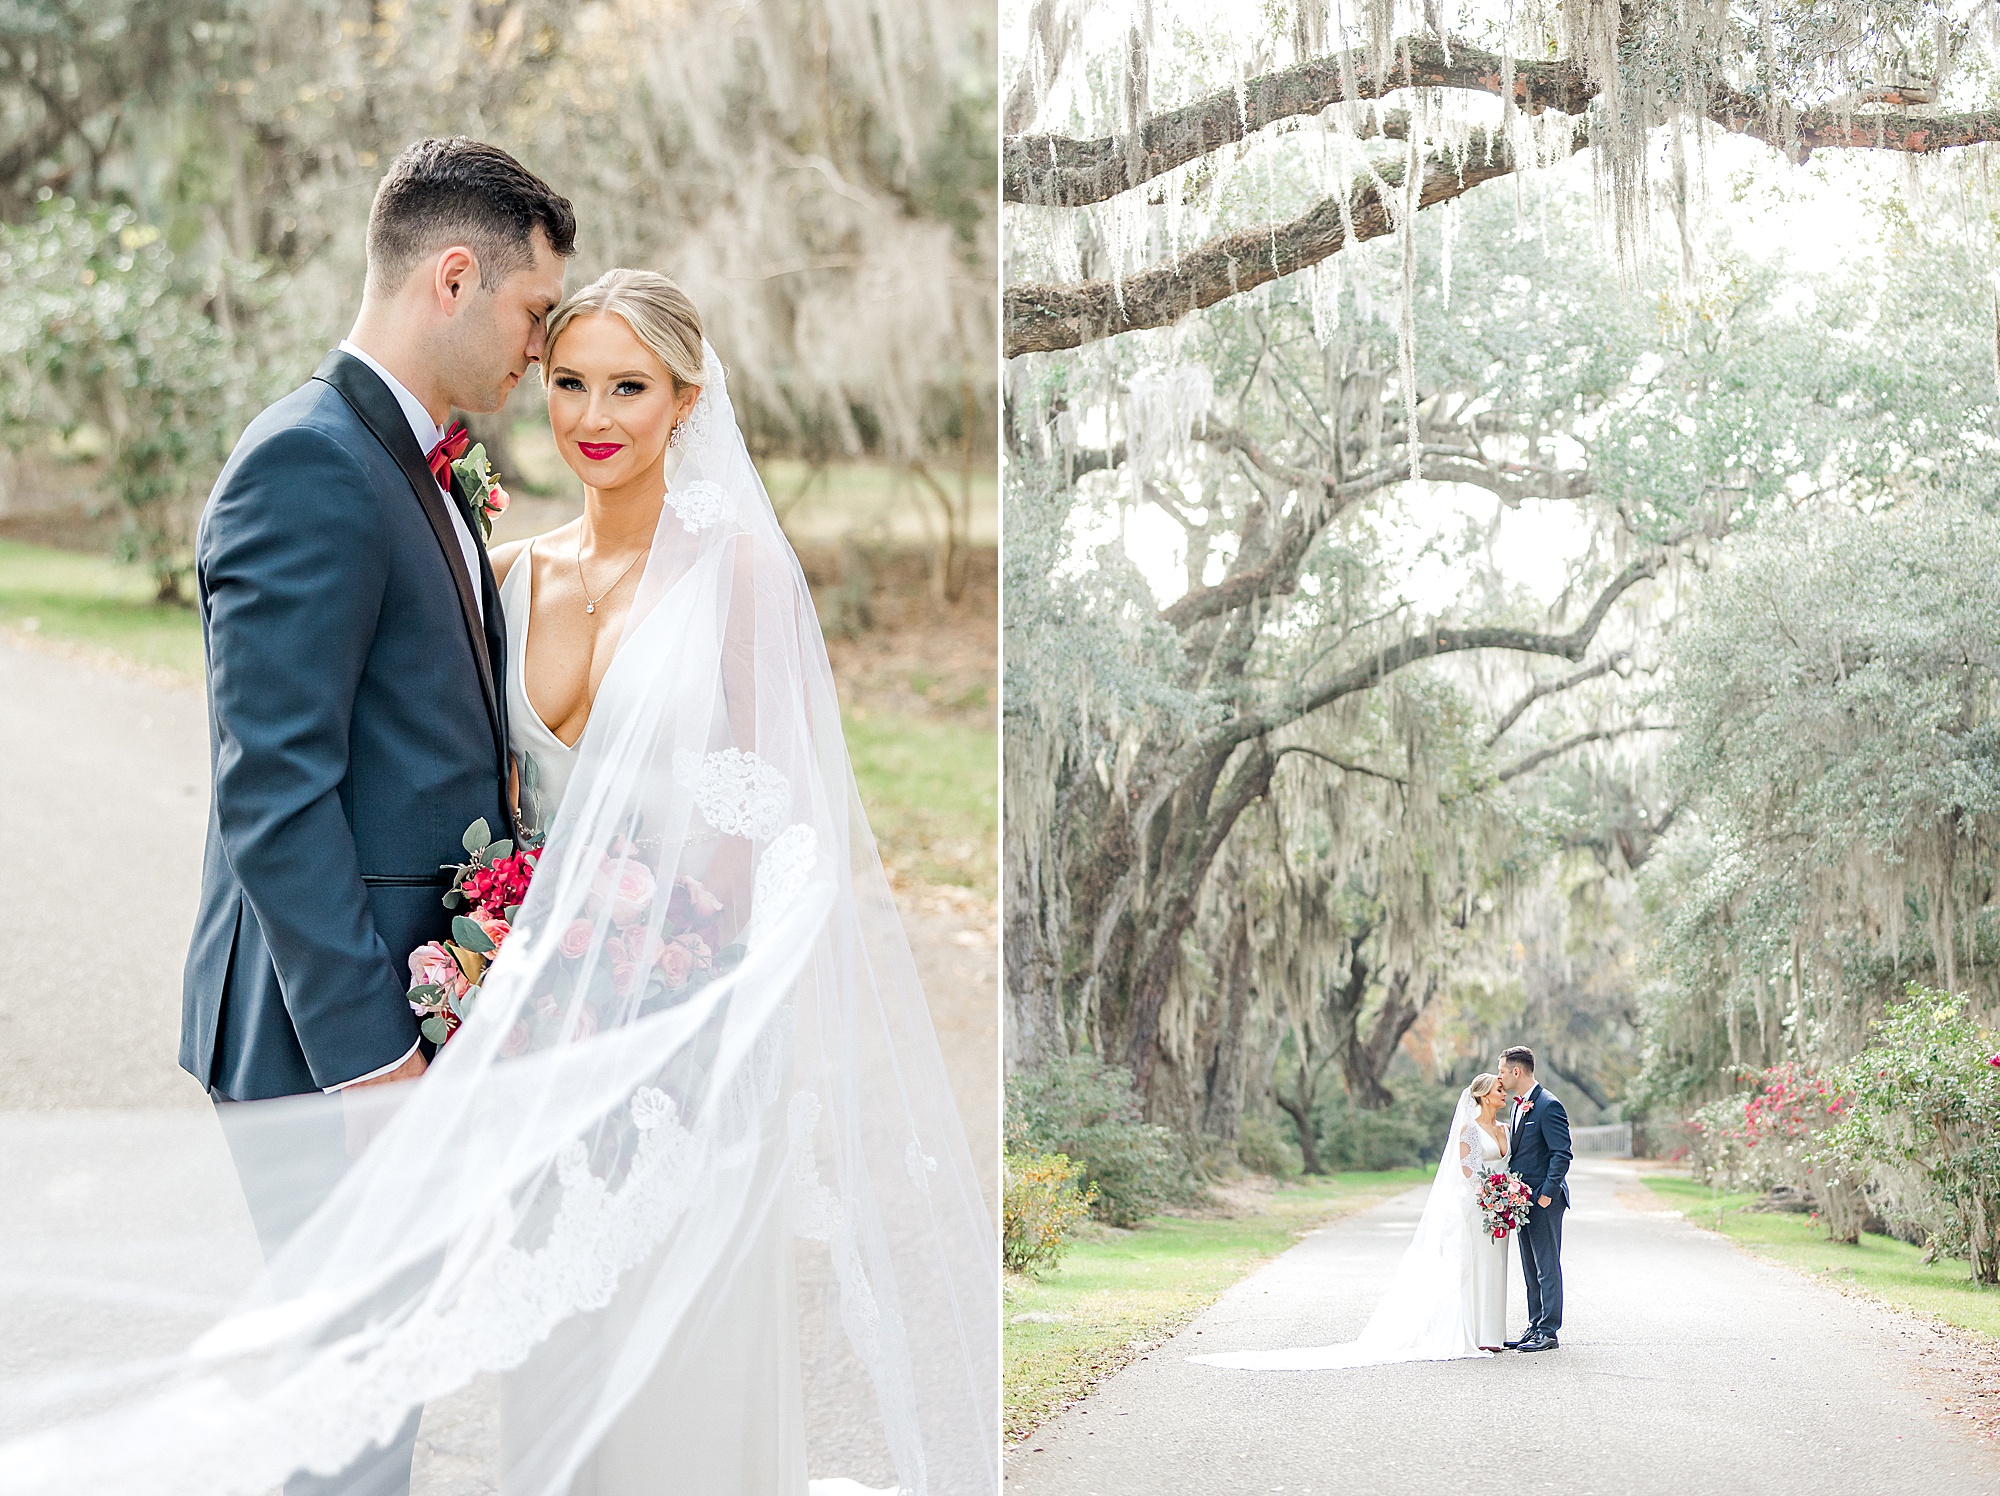 Bride's veil wraps around her and groom during portraits